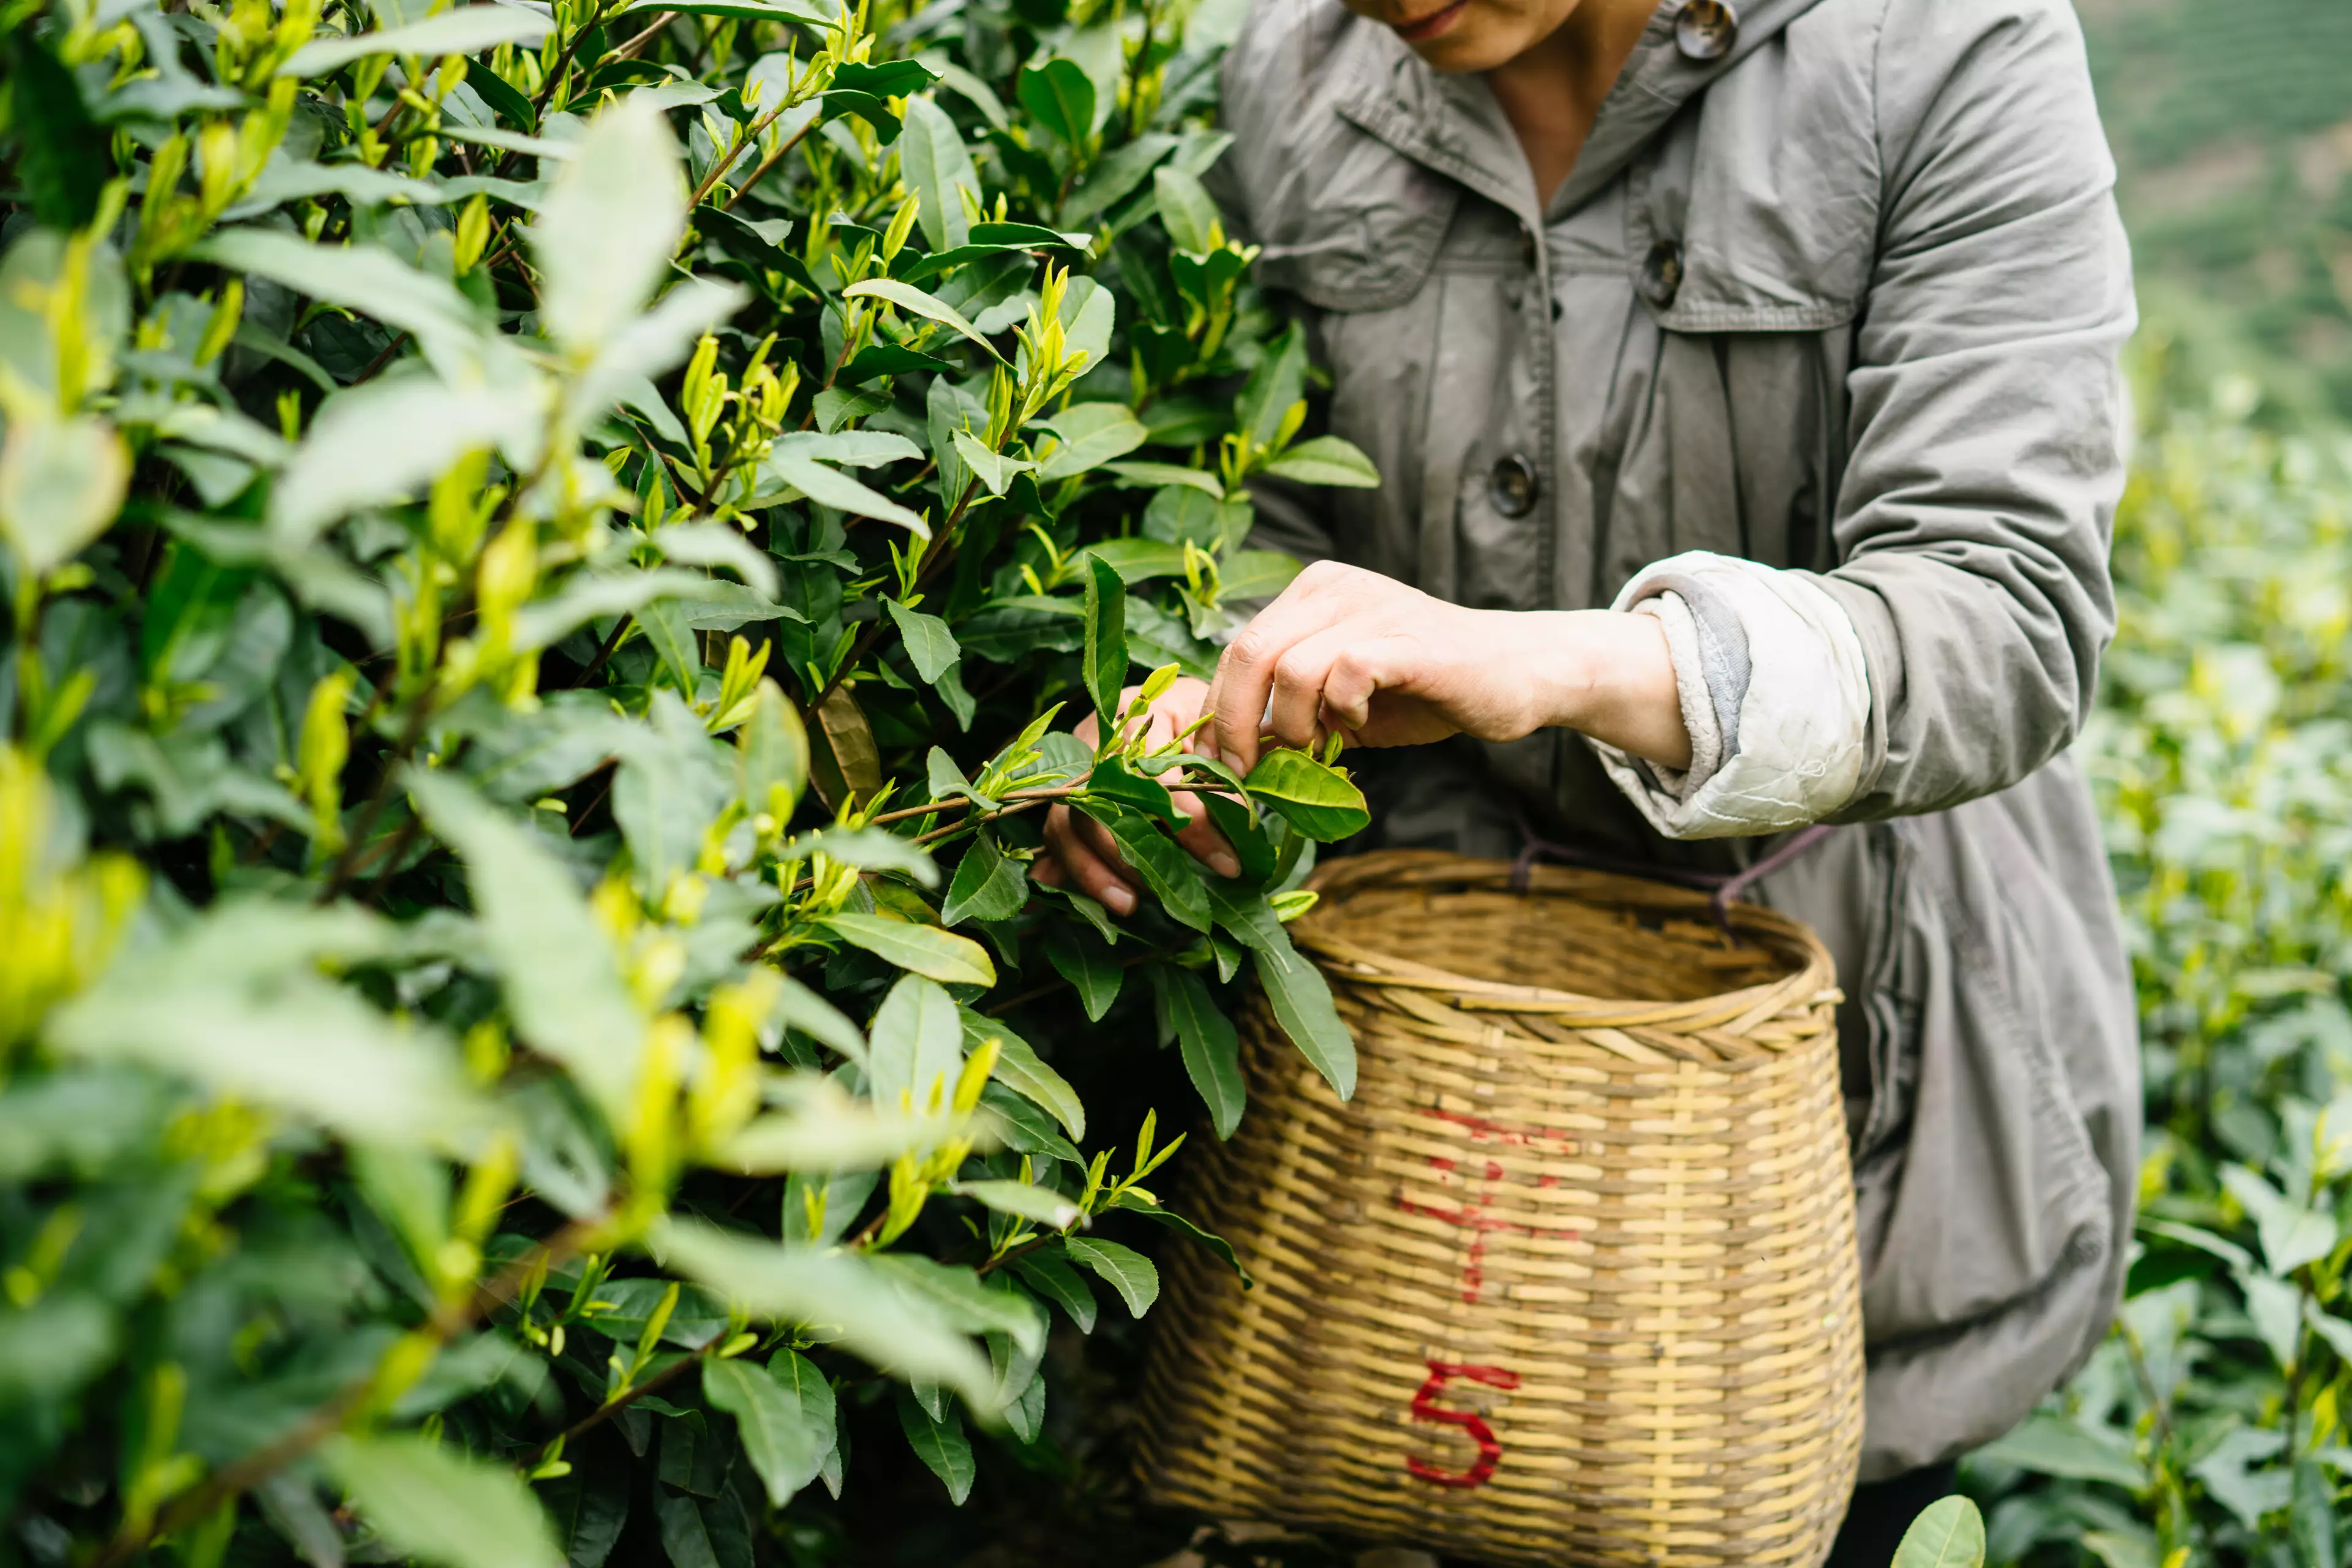 Tea farms' conditions could directly affect the taste of stock, too (